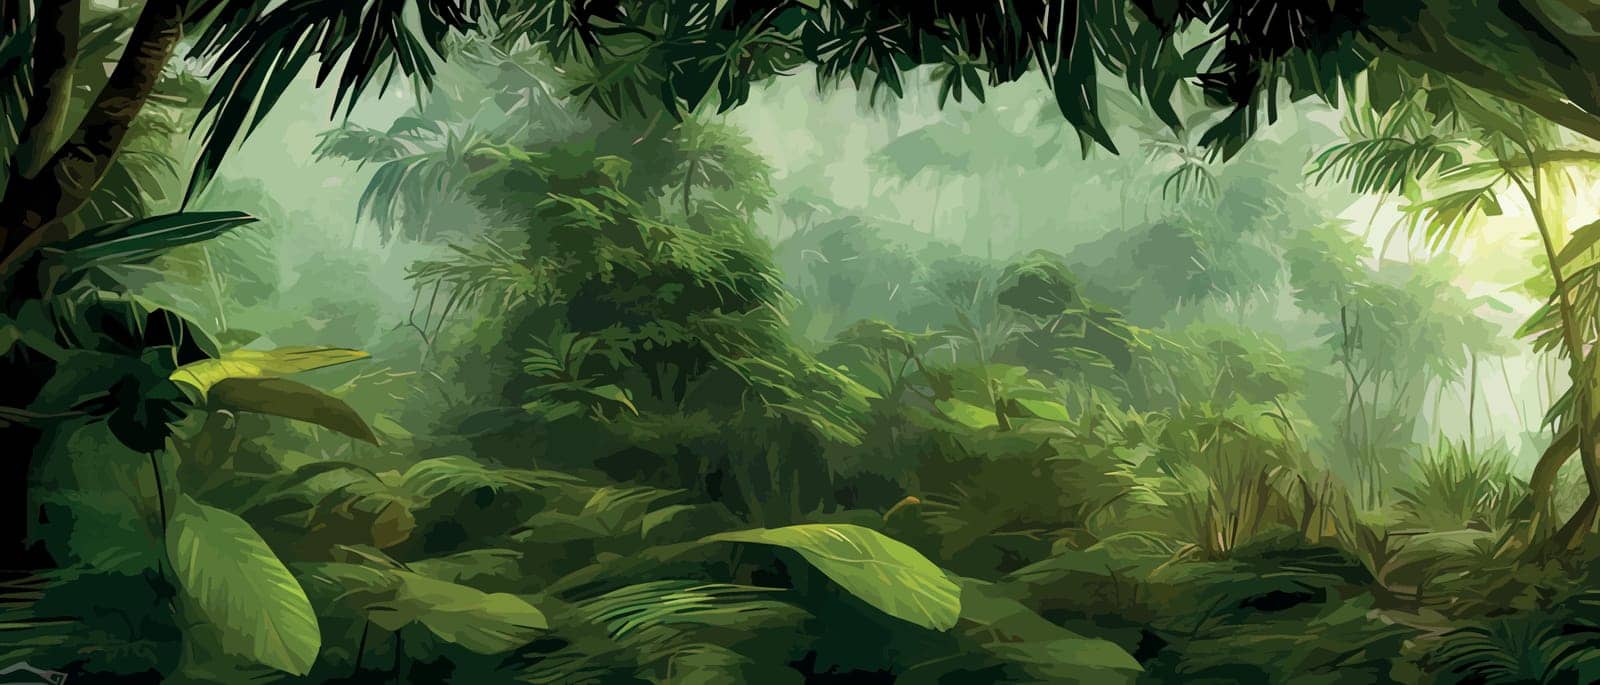 Banner Beautiful rainforest jungle landscape with lush foliage in green colors, vector illustration